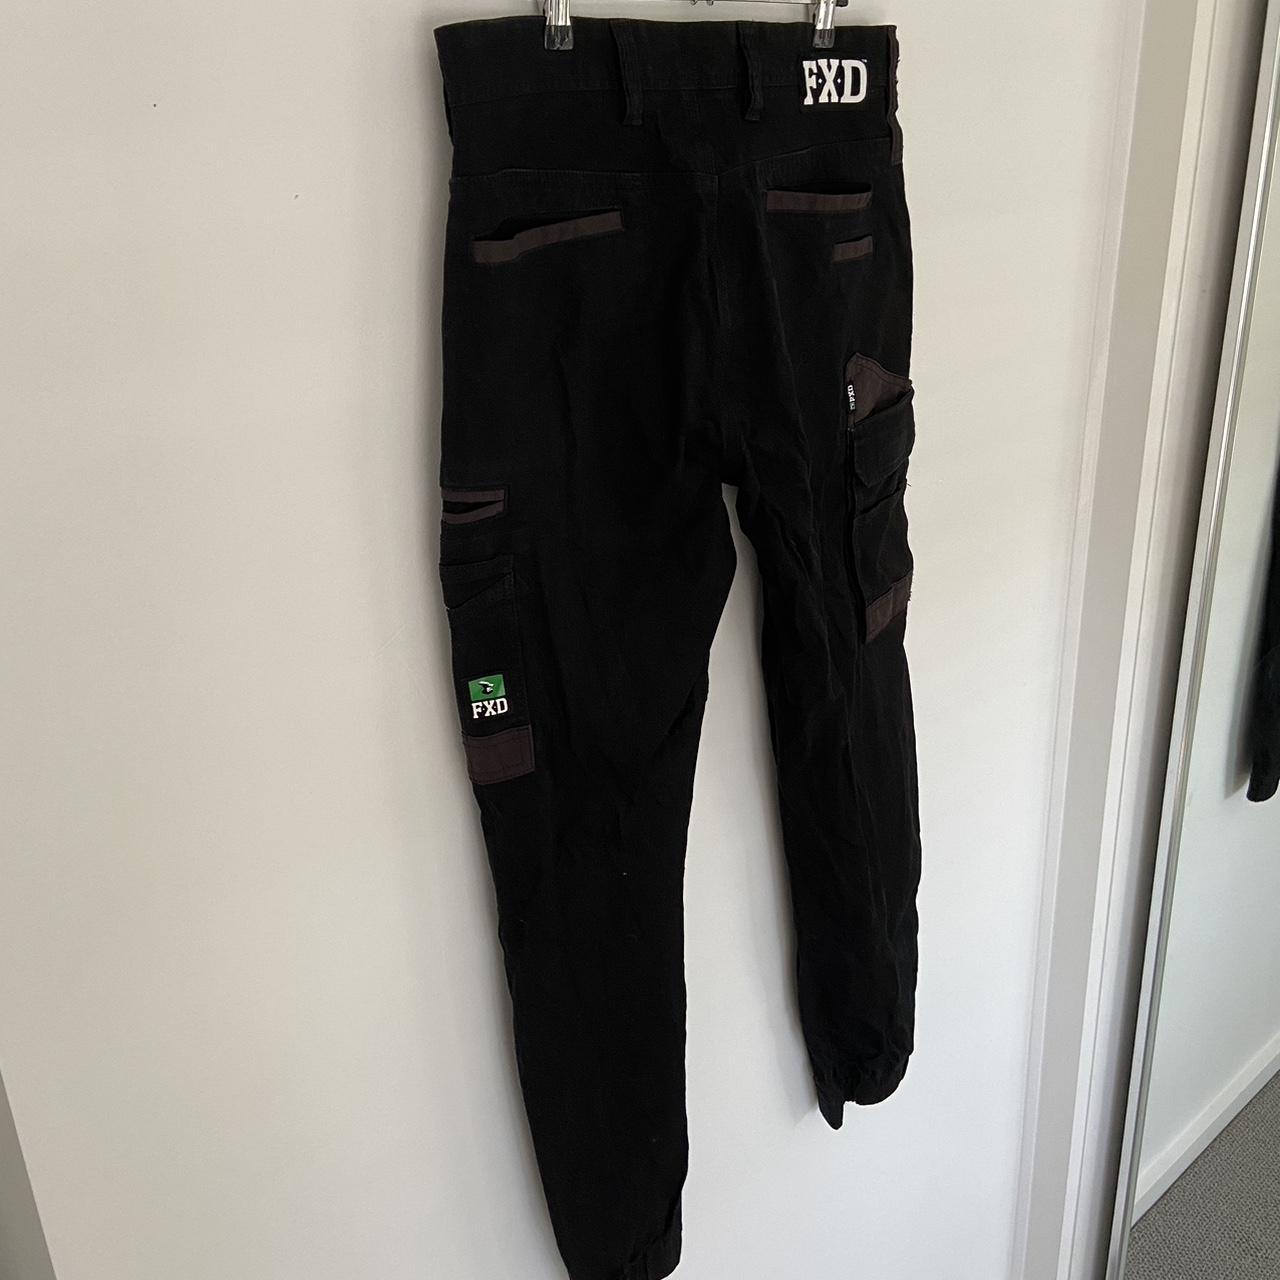 FXD Cuffed Stretched Work Pants (WP4) Black Size... - Depop